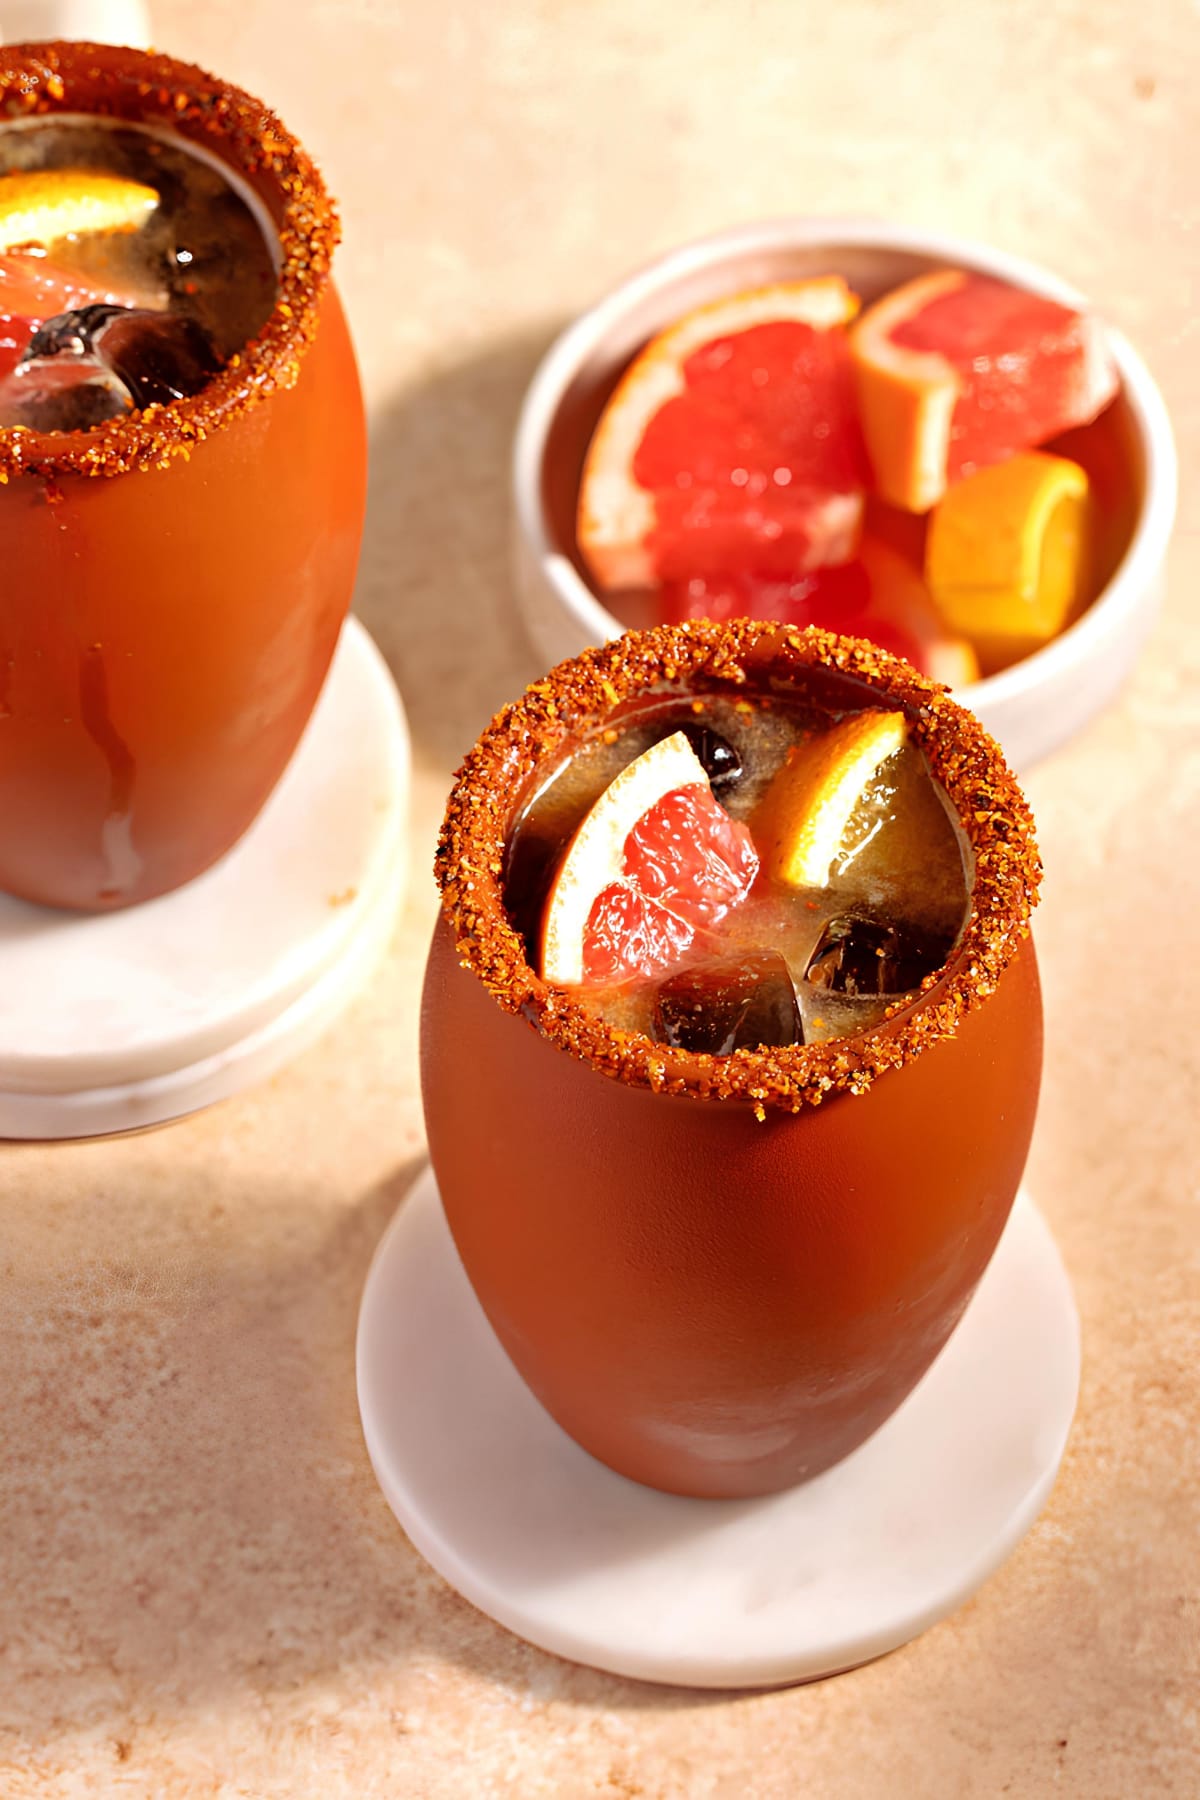 Cantarito Cocktail served Cantarito mugs with tajin on rims garnished with slices of fresh graprfruit.